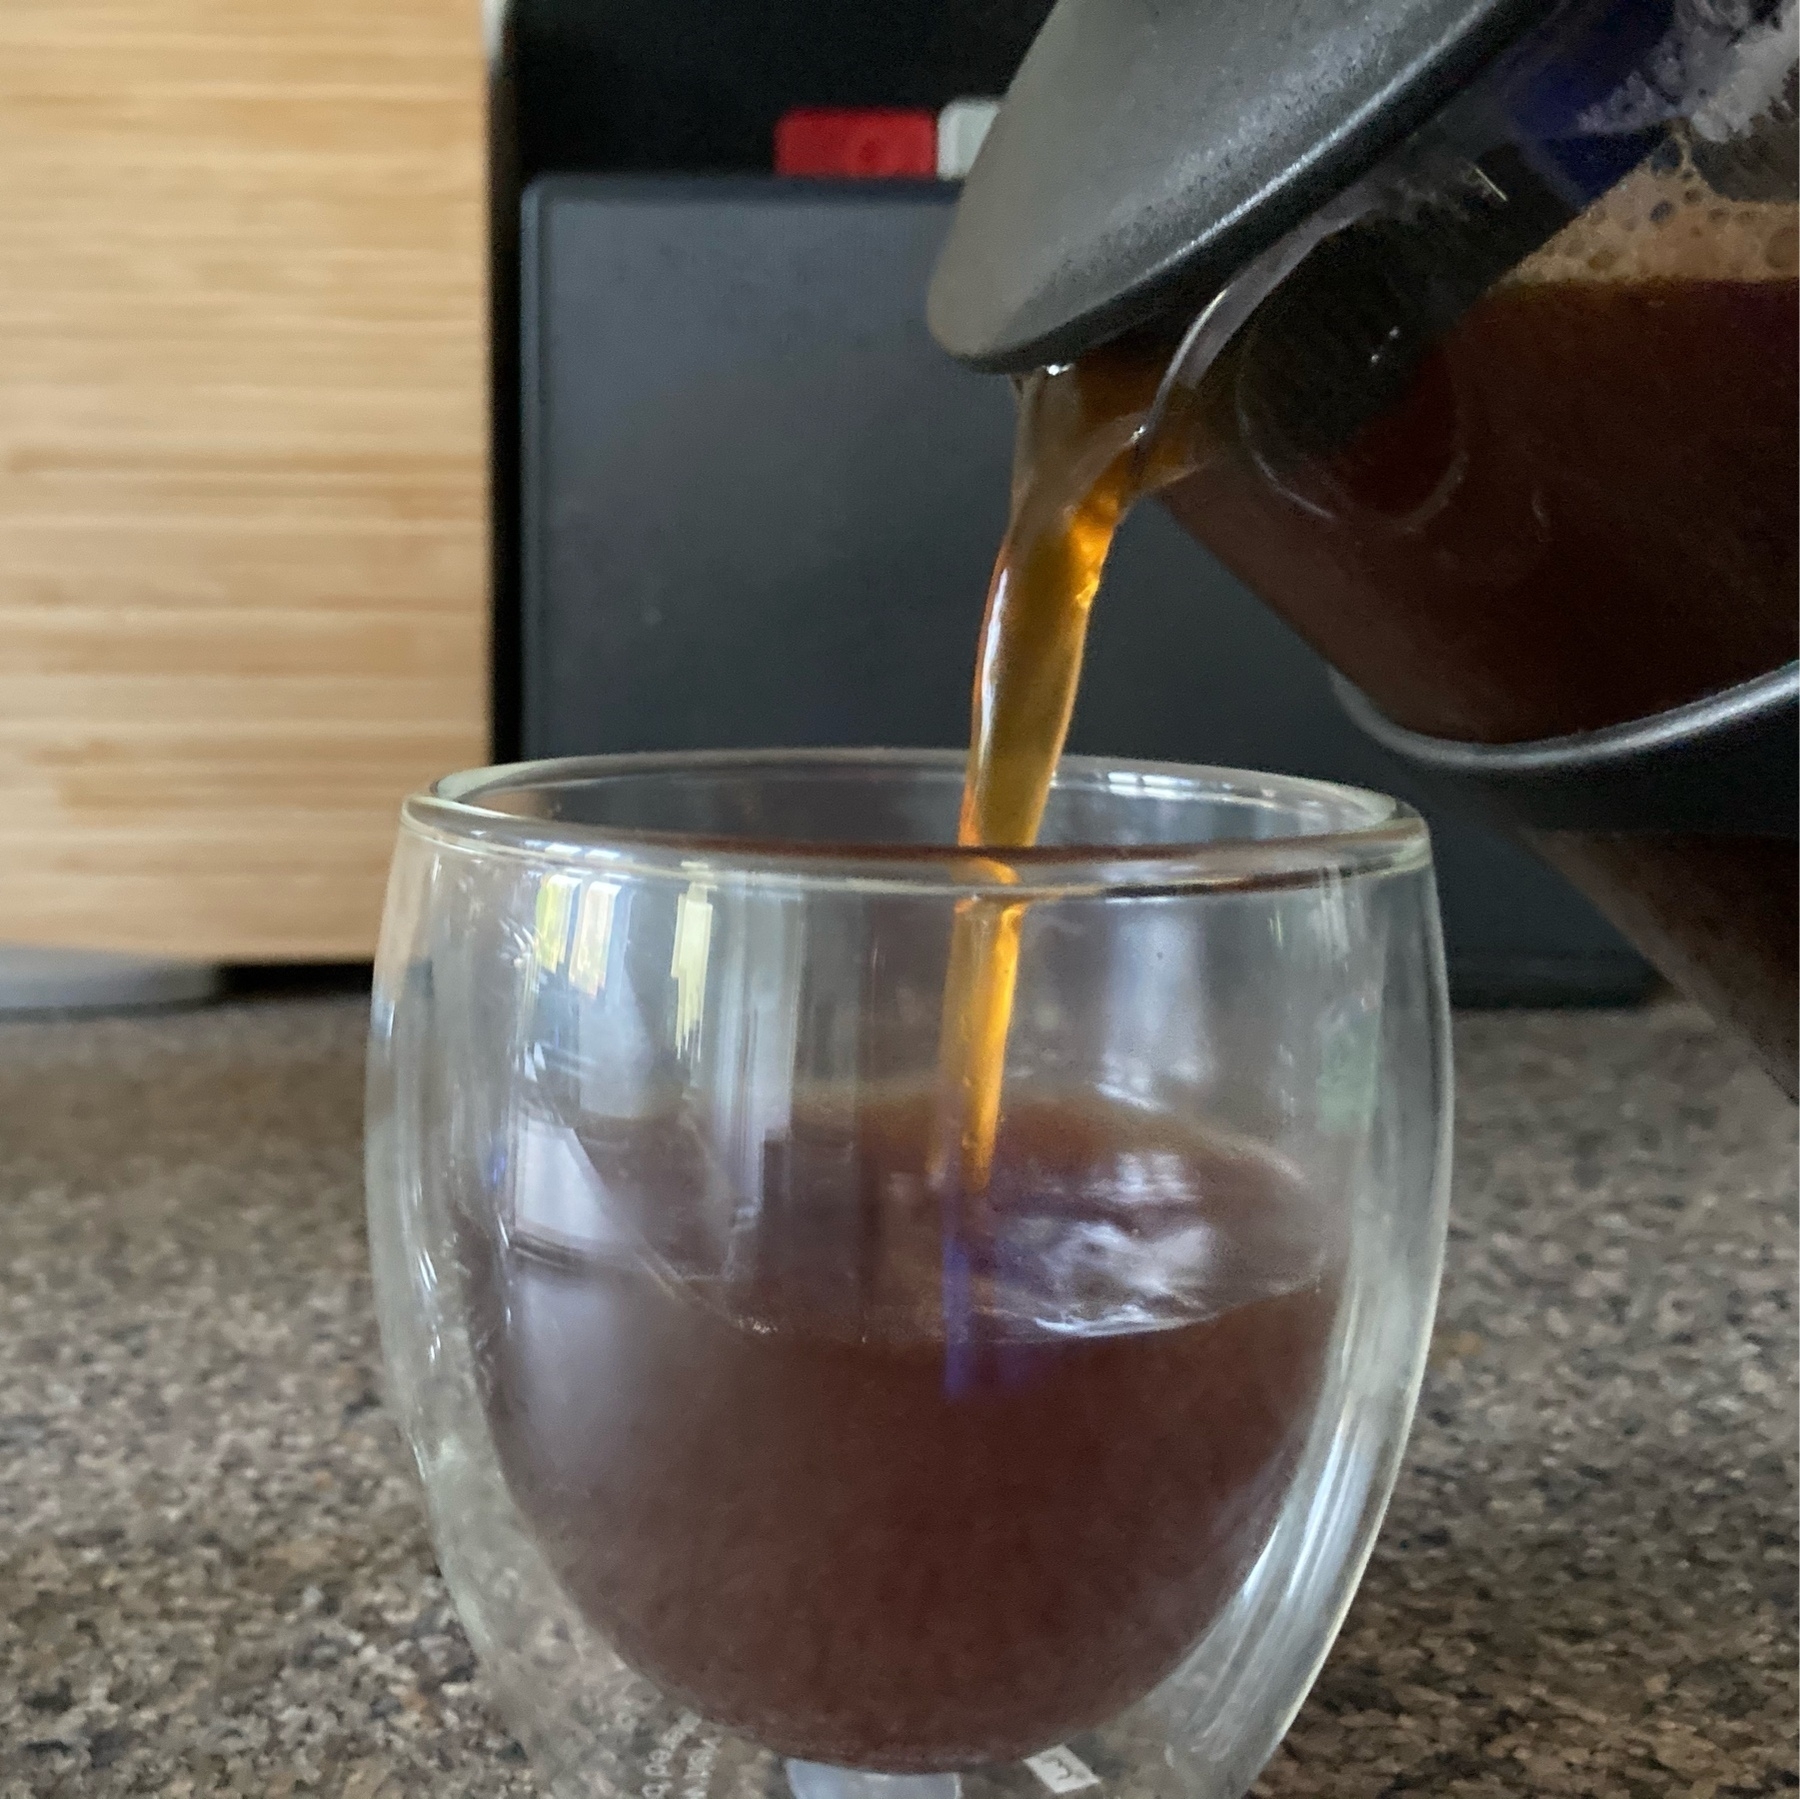 Coffee being poured into a glass.